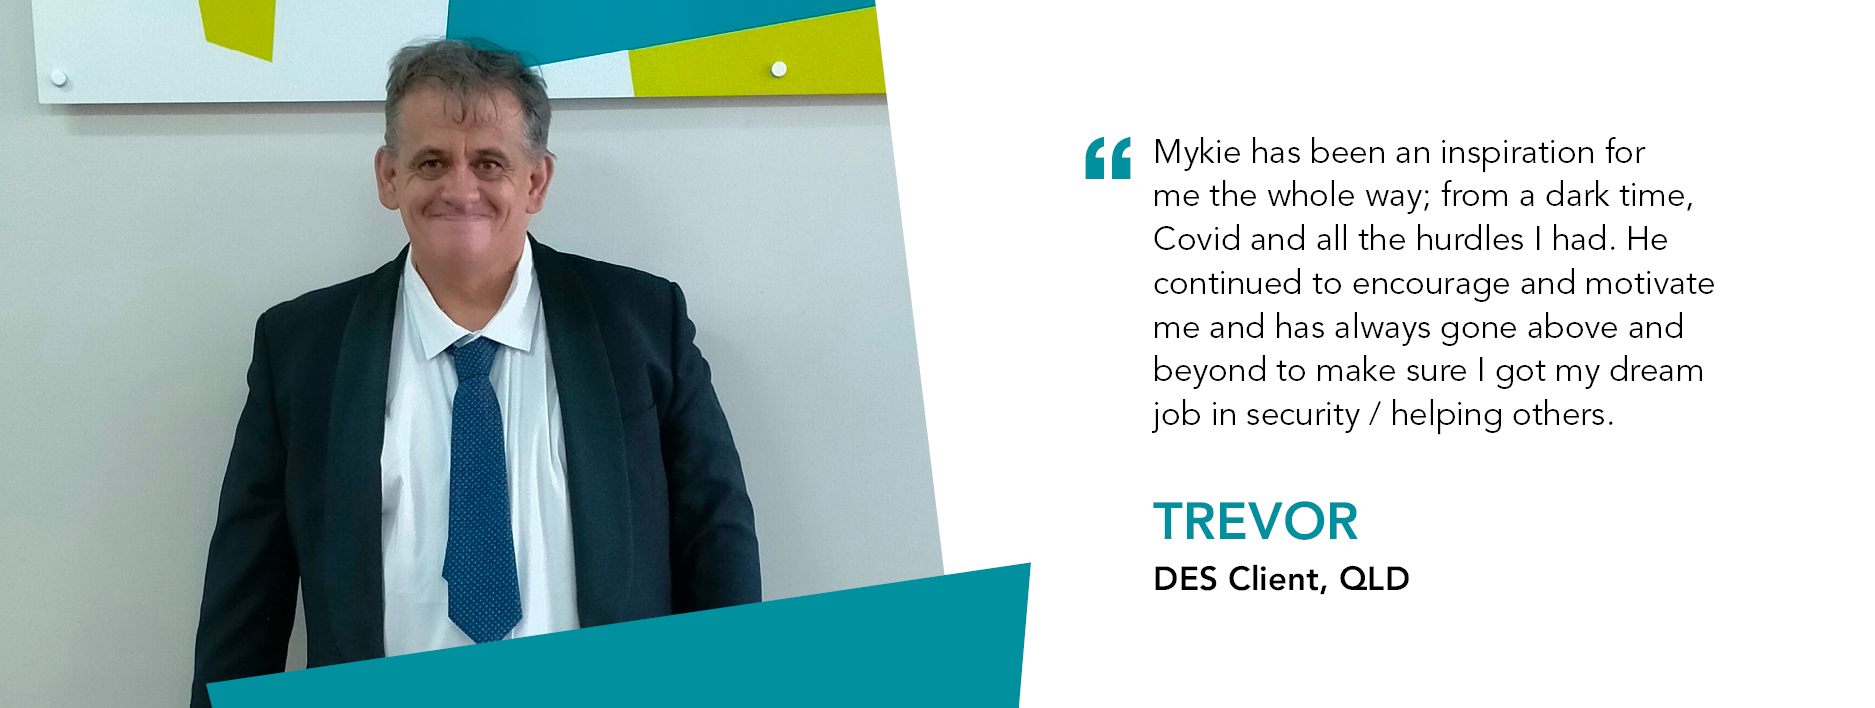 Quote reads: Mykie has been an inspiration for me the whole way; from a dark time, Covid and all the hurdles I had. He continued to encourage and motivate me and has always gone above and beyond to make sure I got my dream job in security/ helping others. – DES Client, Trevor.